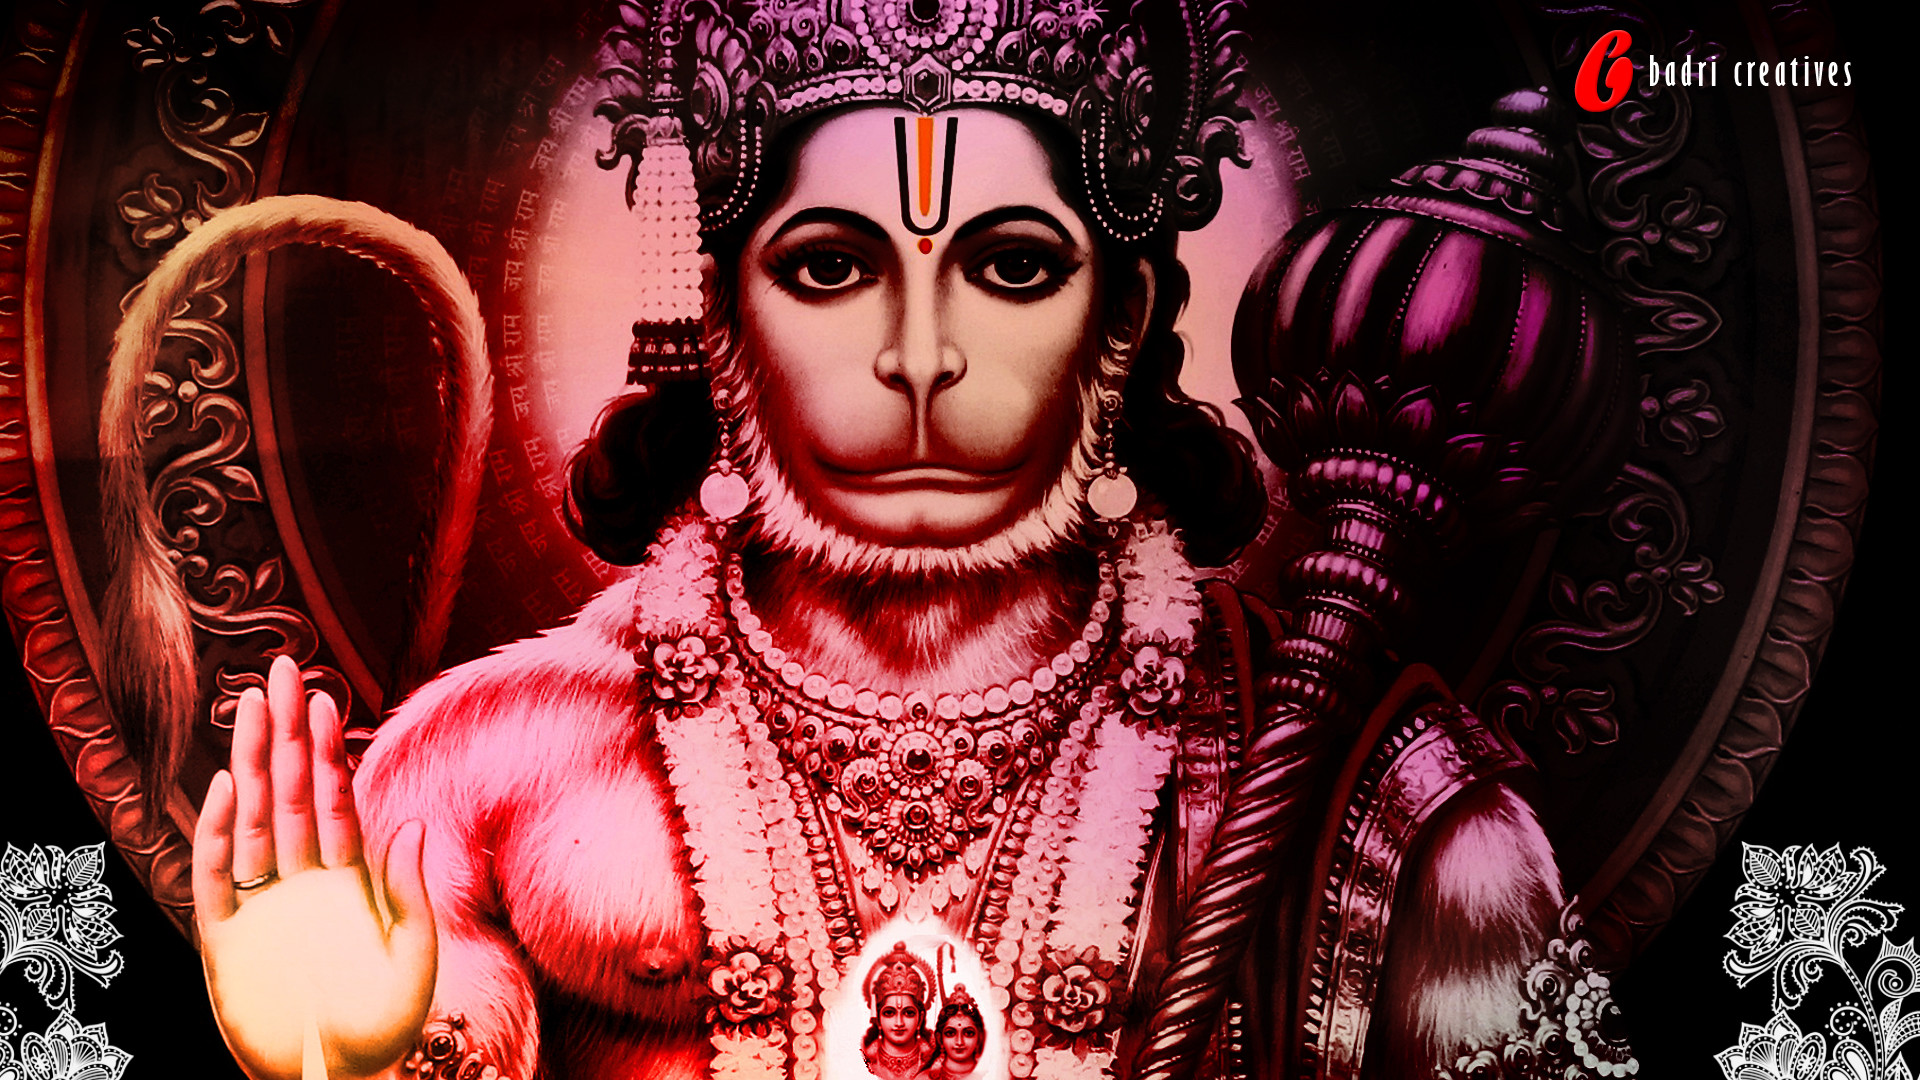 4k Wallpaper Full Hd 1080p Hanuman Hd Wallpaper 1920x1080 If you're in search of the best hanuman wallpapers, you've come to the right place. 4k wallpaper blogger